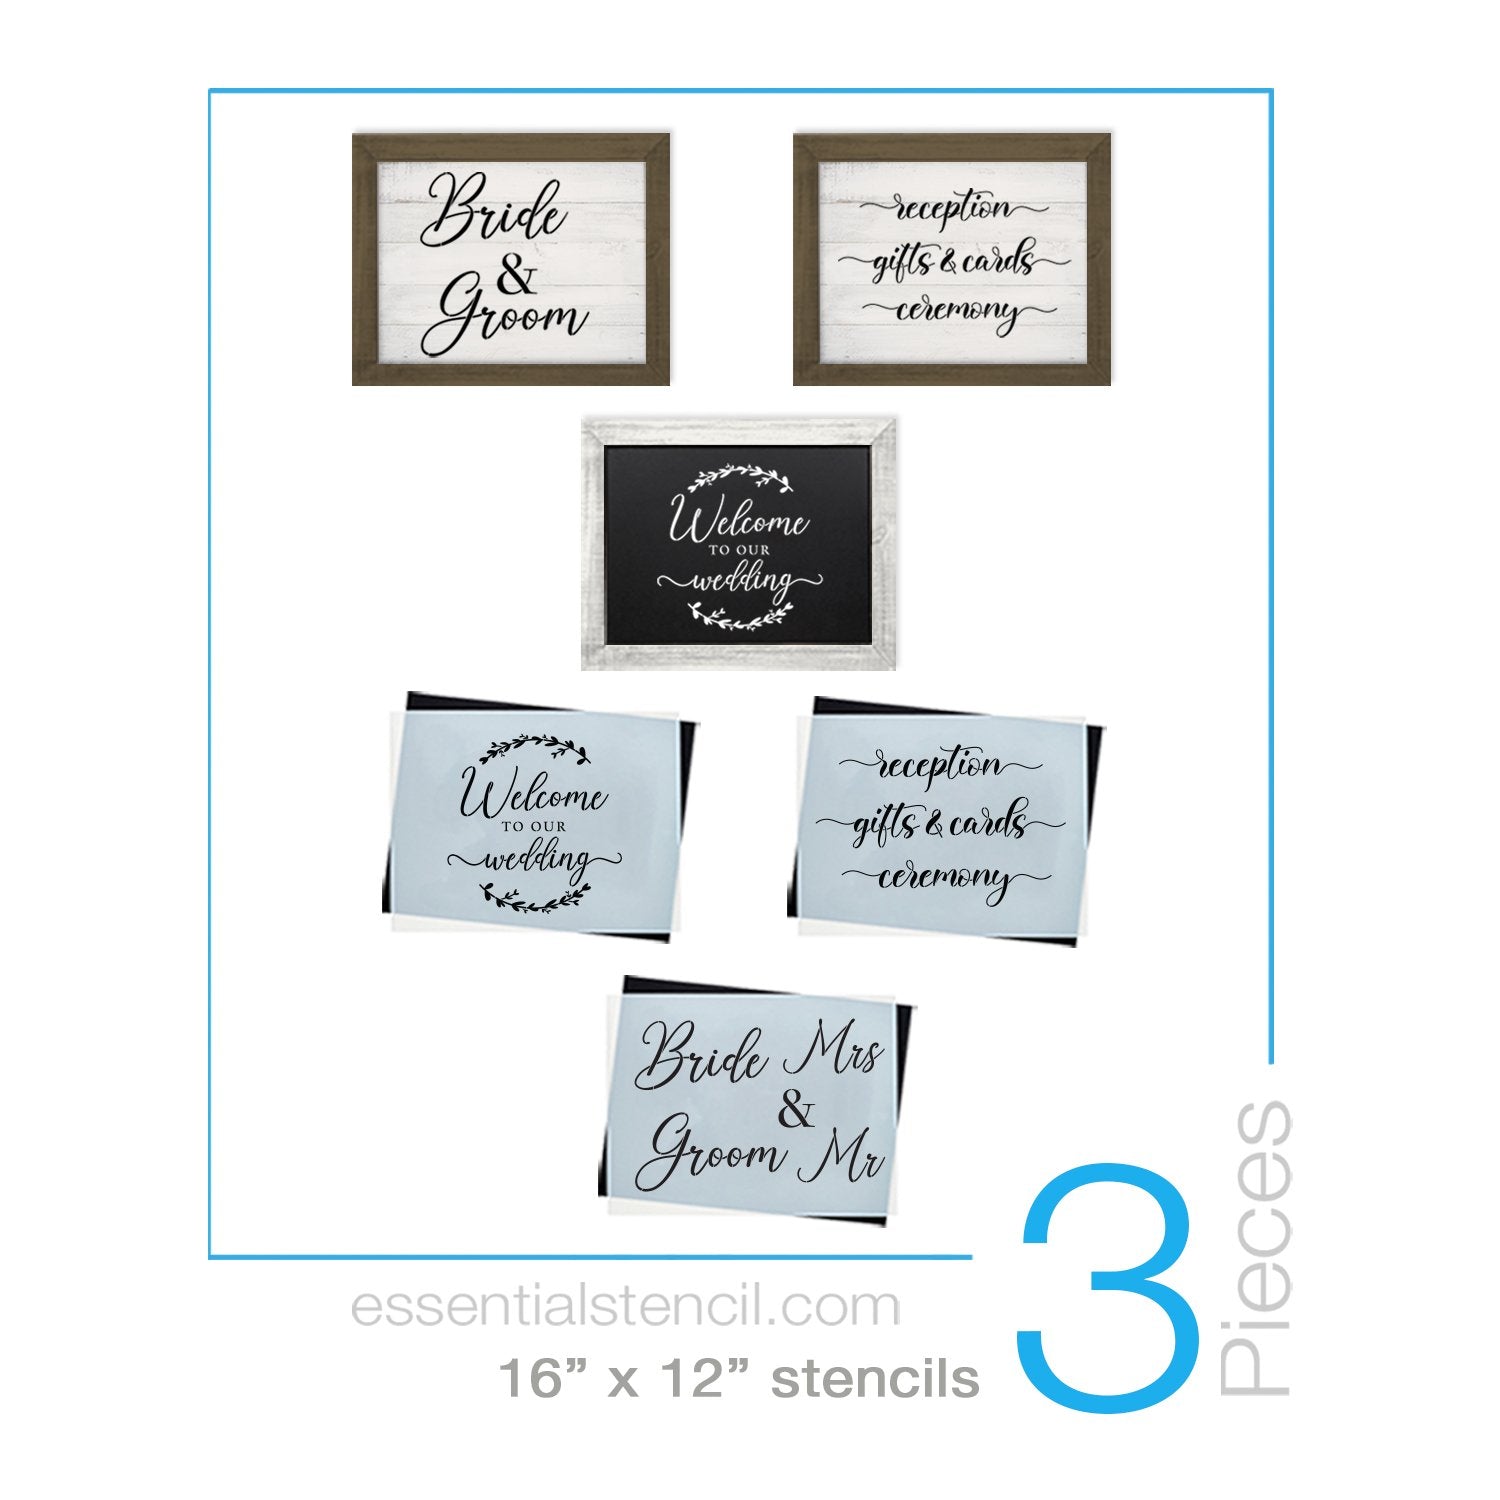 DIY reusable wedding stencils, Bride and groom stencils, Mr and Mrs stencils, reception, gift cards and ceremony reusable stencils, Welcome to our Wedding stencils